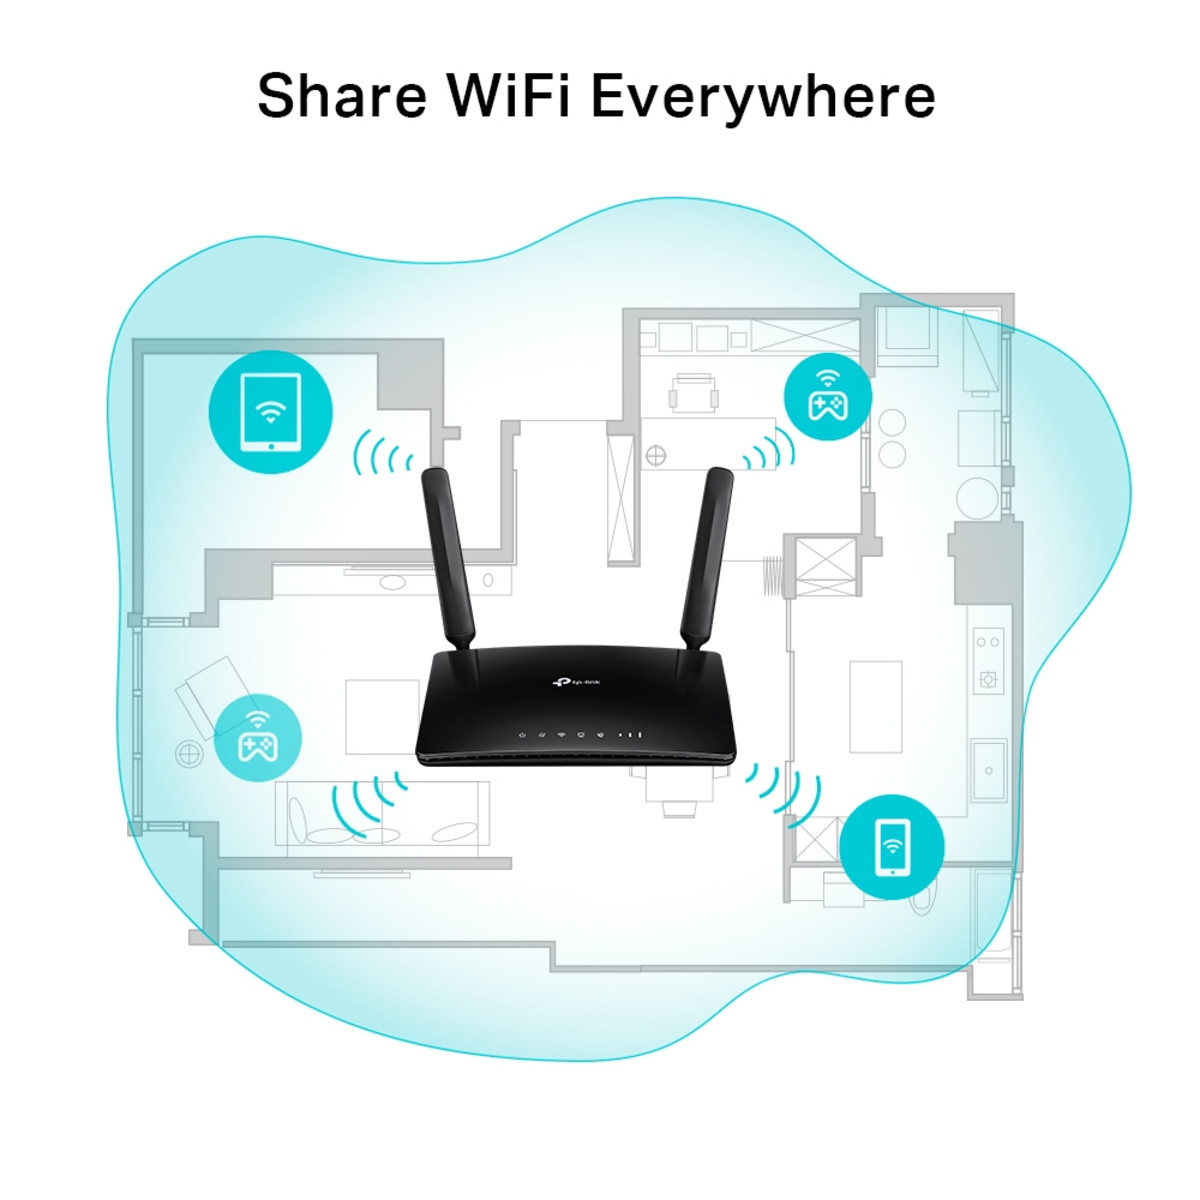 300Mbps Wireless Telephony Router